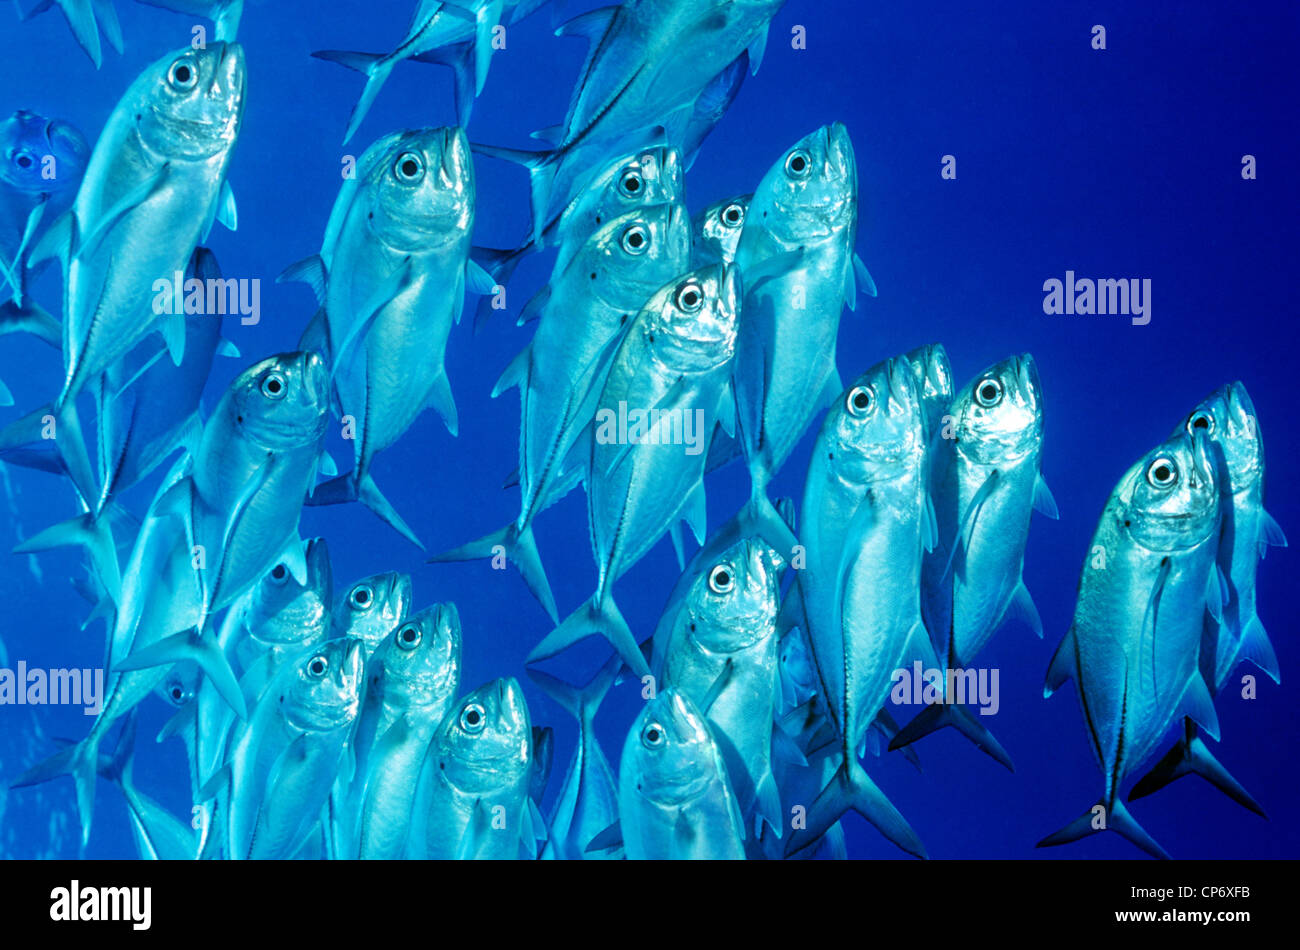 Big - Eye Trevally or Horse Eyed Jack. Large shoals of these fish are found throughout the Red Sea. Stock Photo